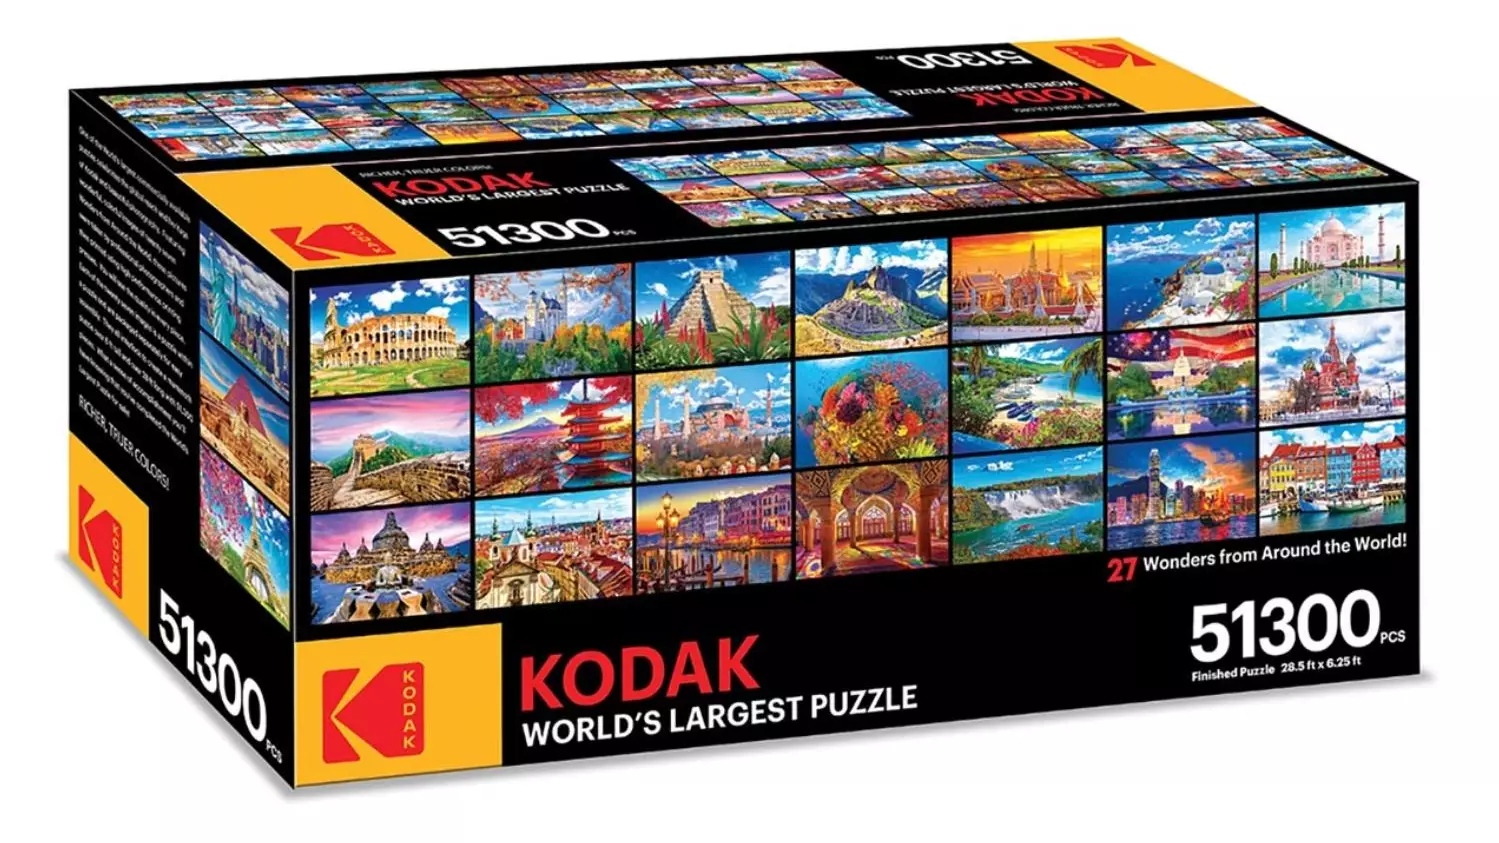 Kodak Is Selling The World's Largest Jigsaw Puzzle